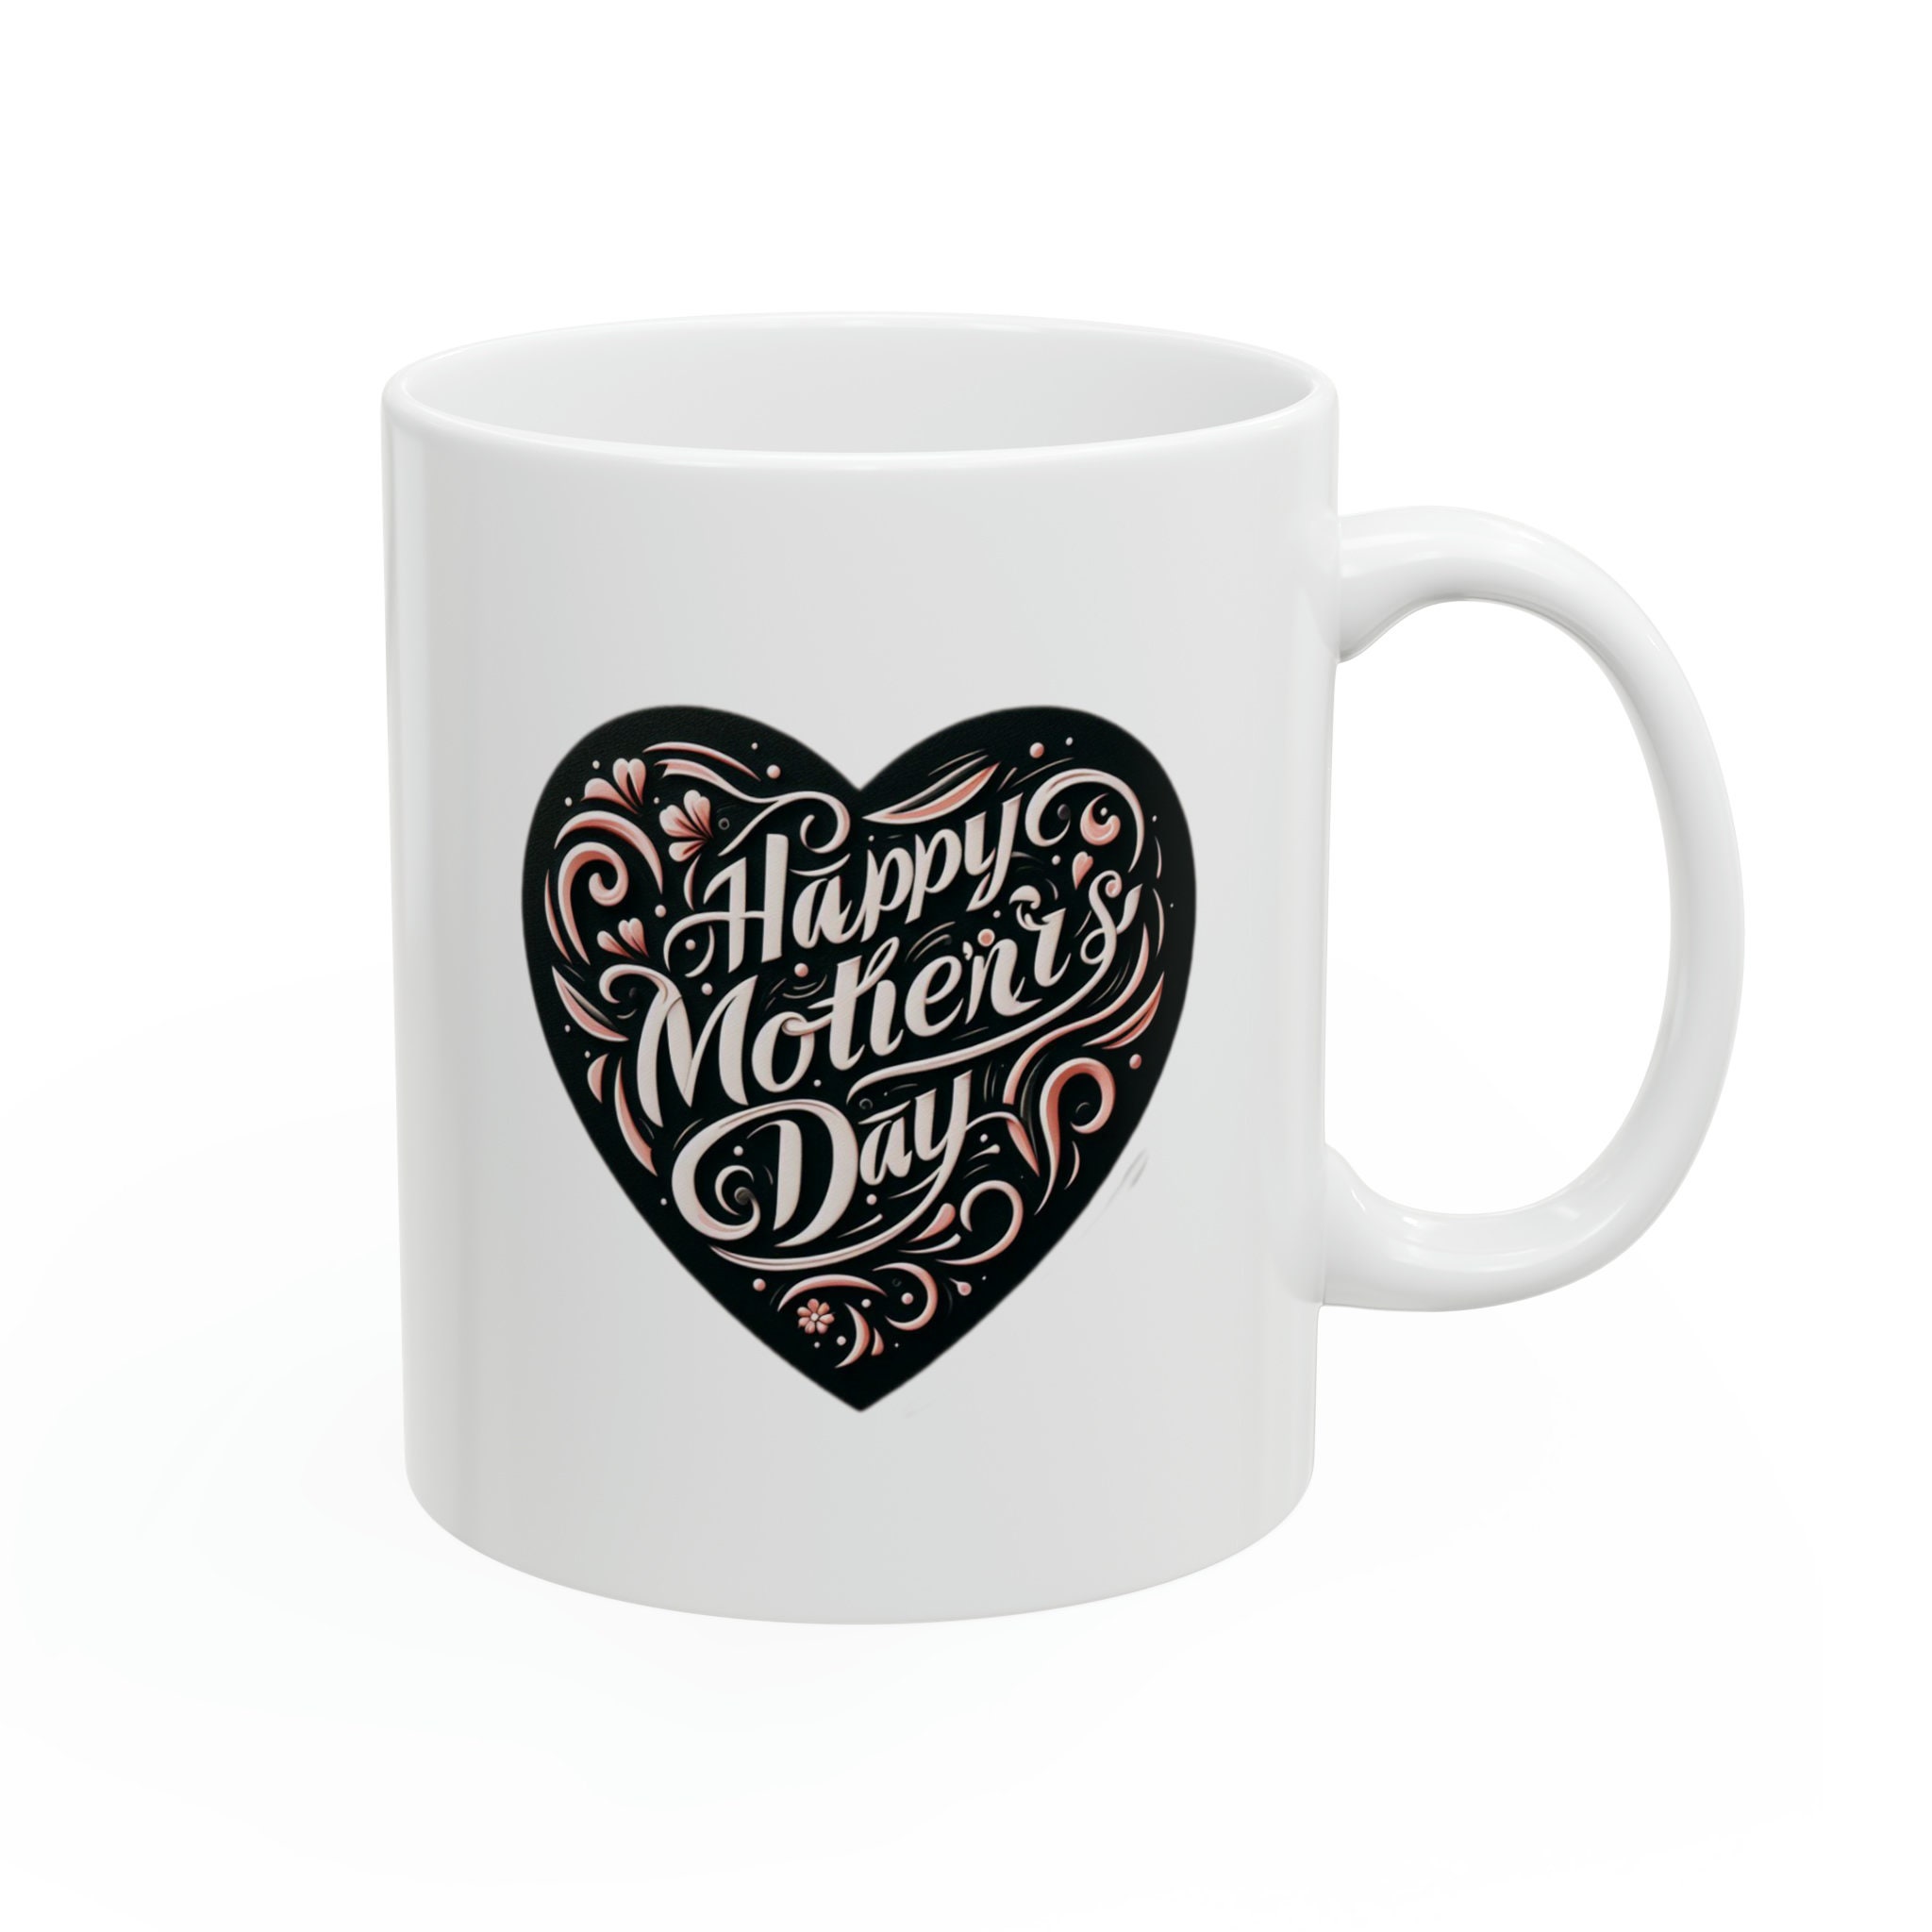 Happy mother' day - Coffee Mug for Mother's day